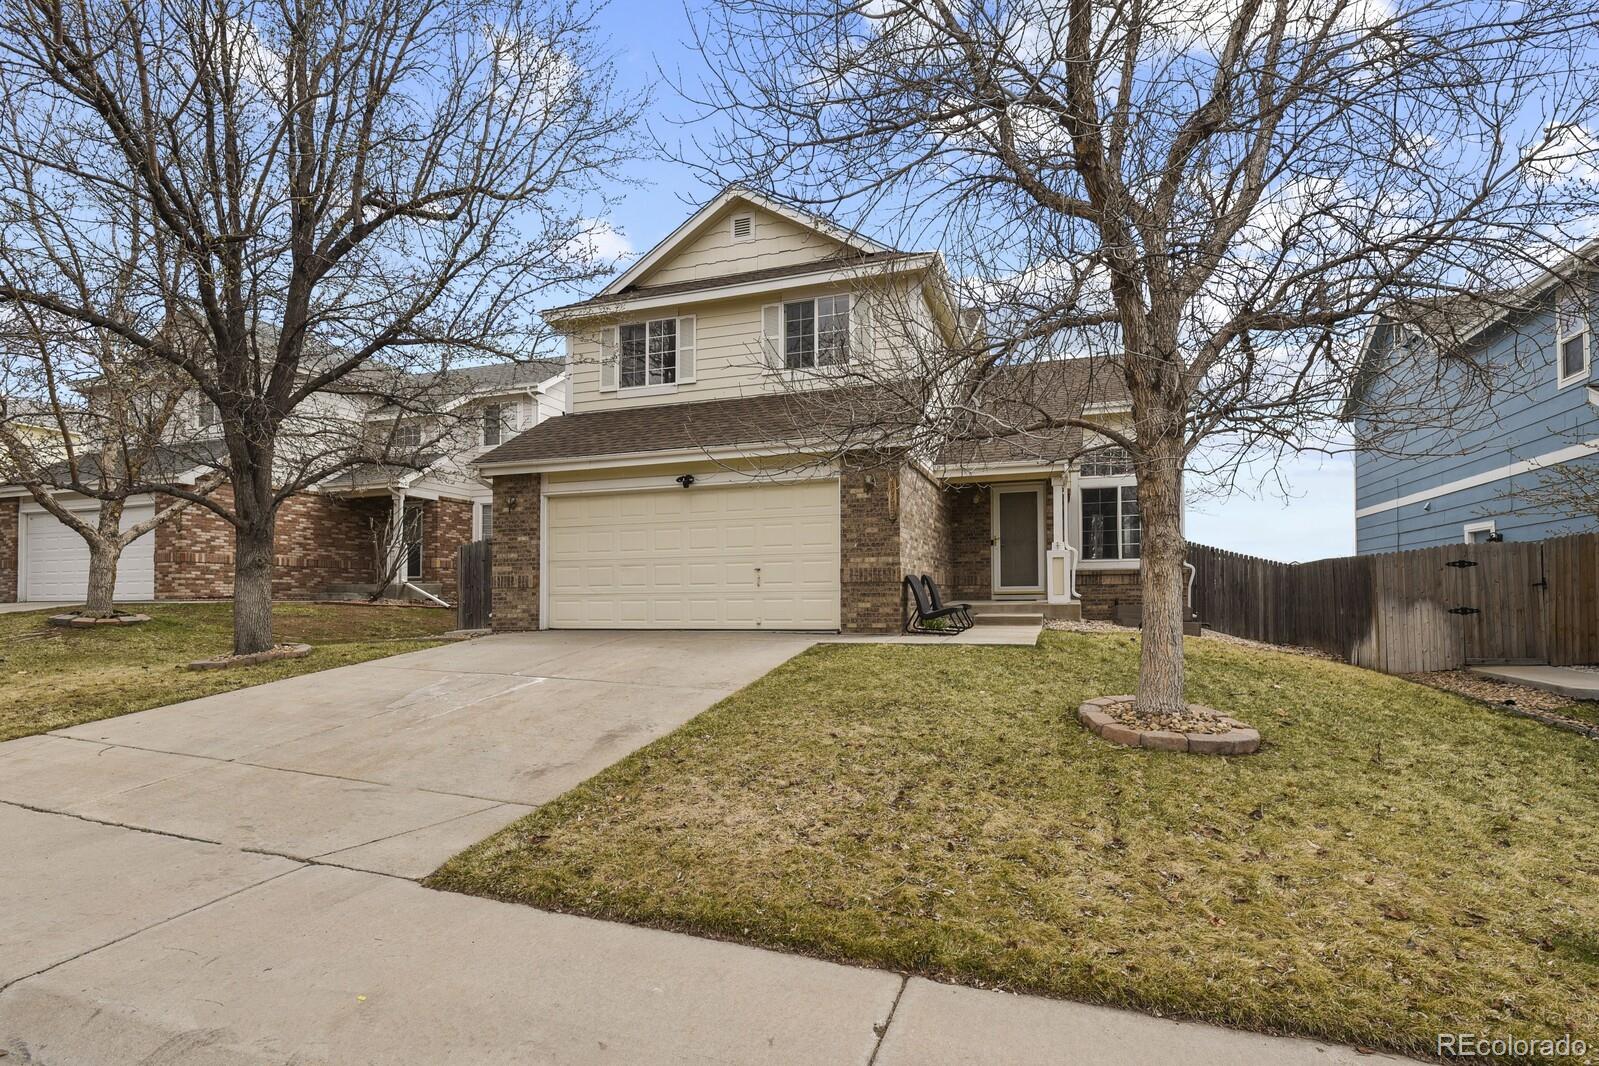 19682 e harvard drive, aurora sold home. Closed on 2024-05-14 for $530,000.